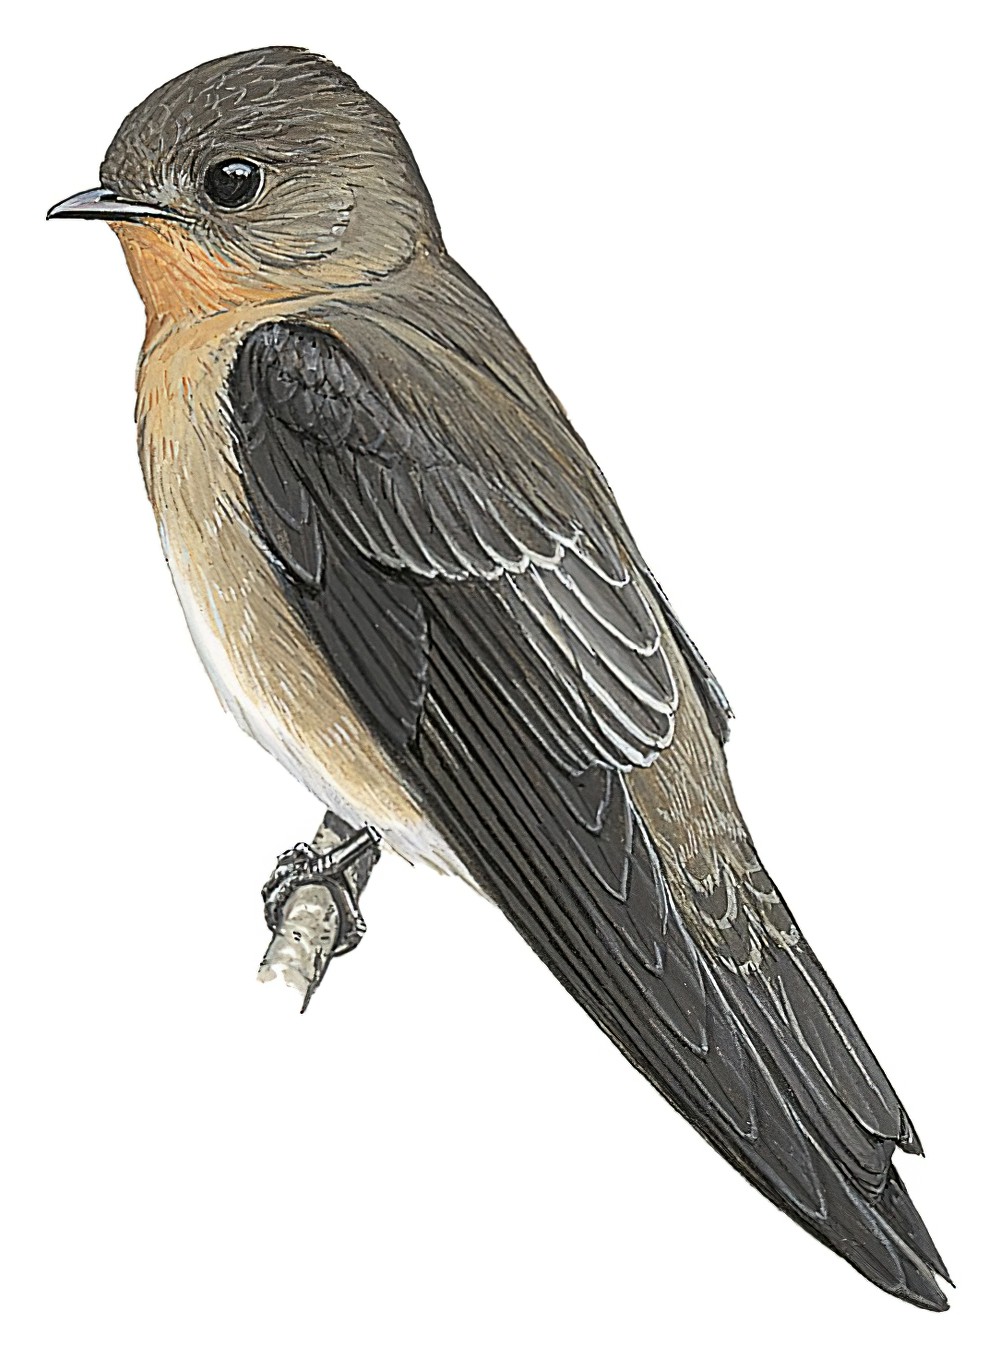 Southern Rough-winged Swallow / Stelgidopteryx ruficollis